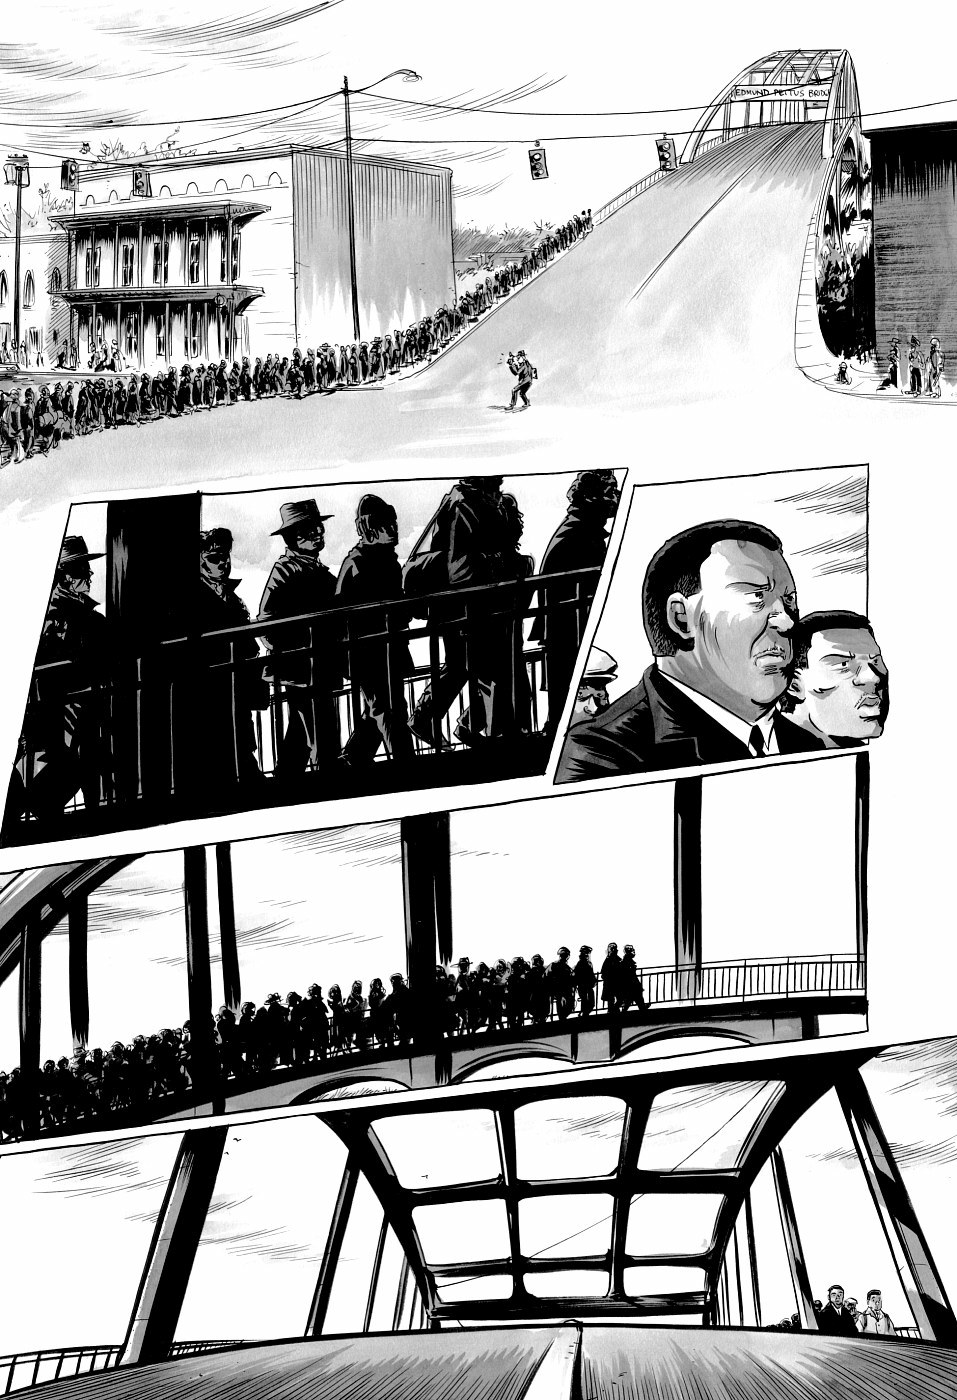 page 196 of march book three graphic novel